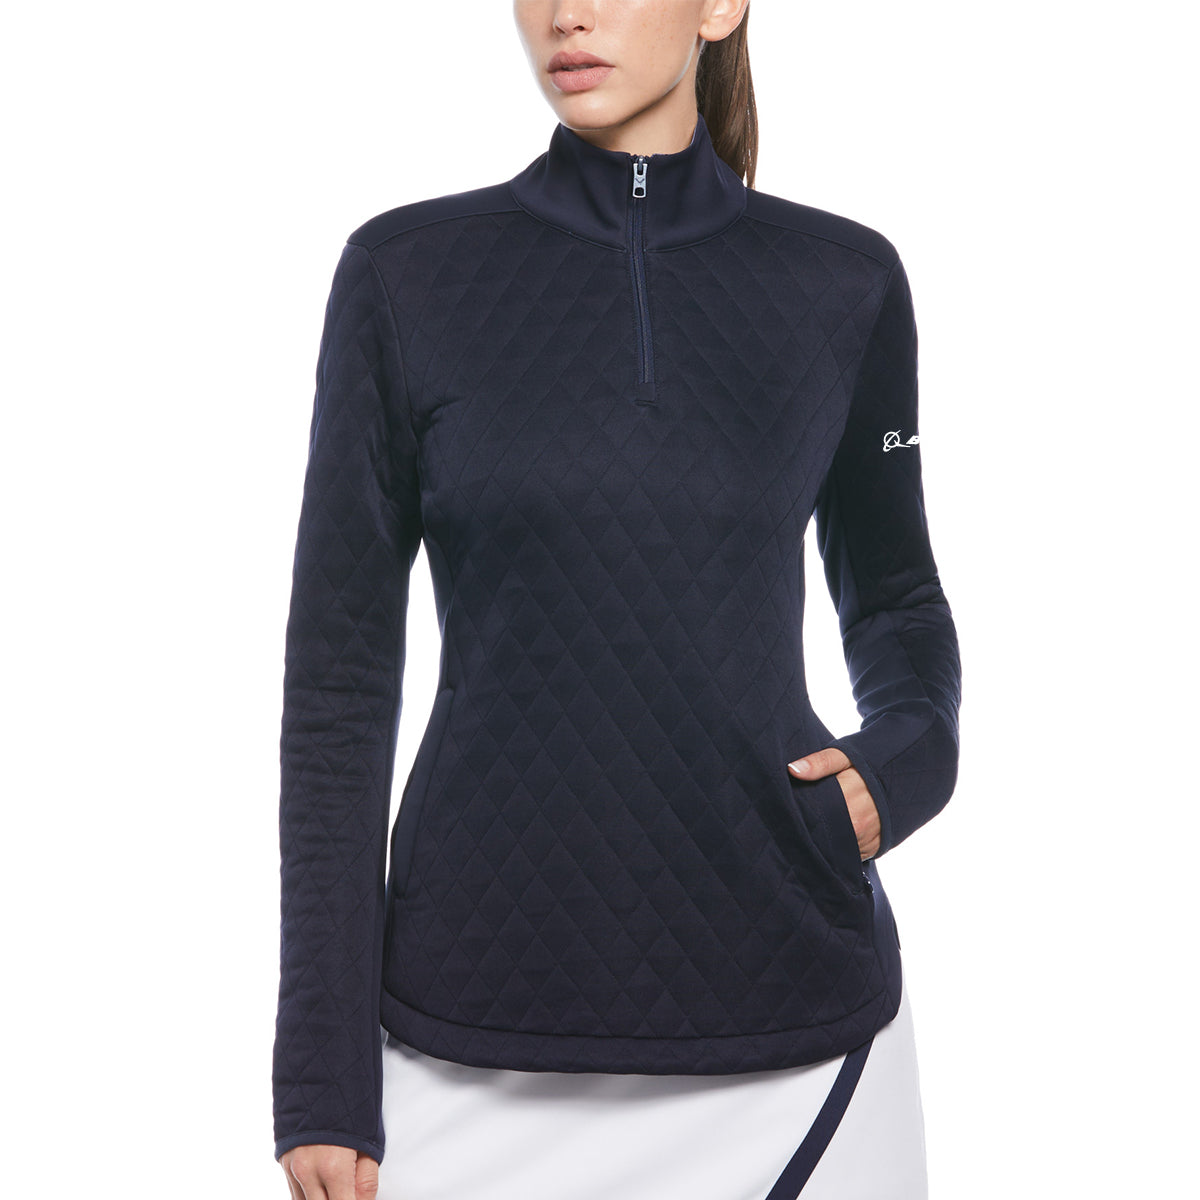 Callaway Boeing Women’s Quarter-Zip Quilted Layer – The Boeing Store